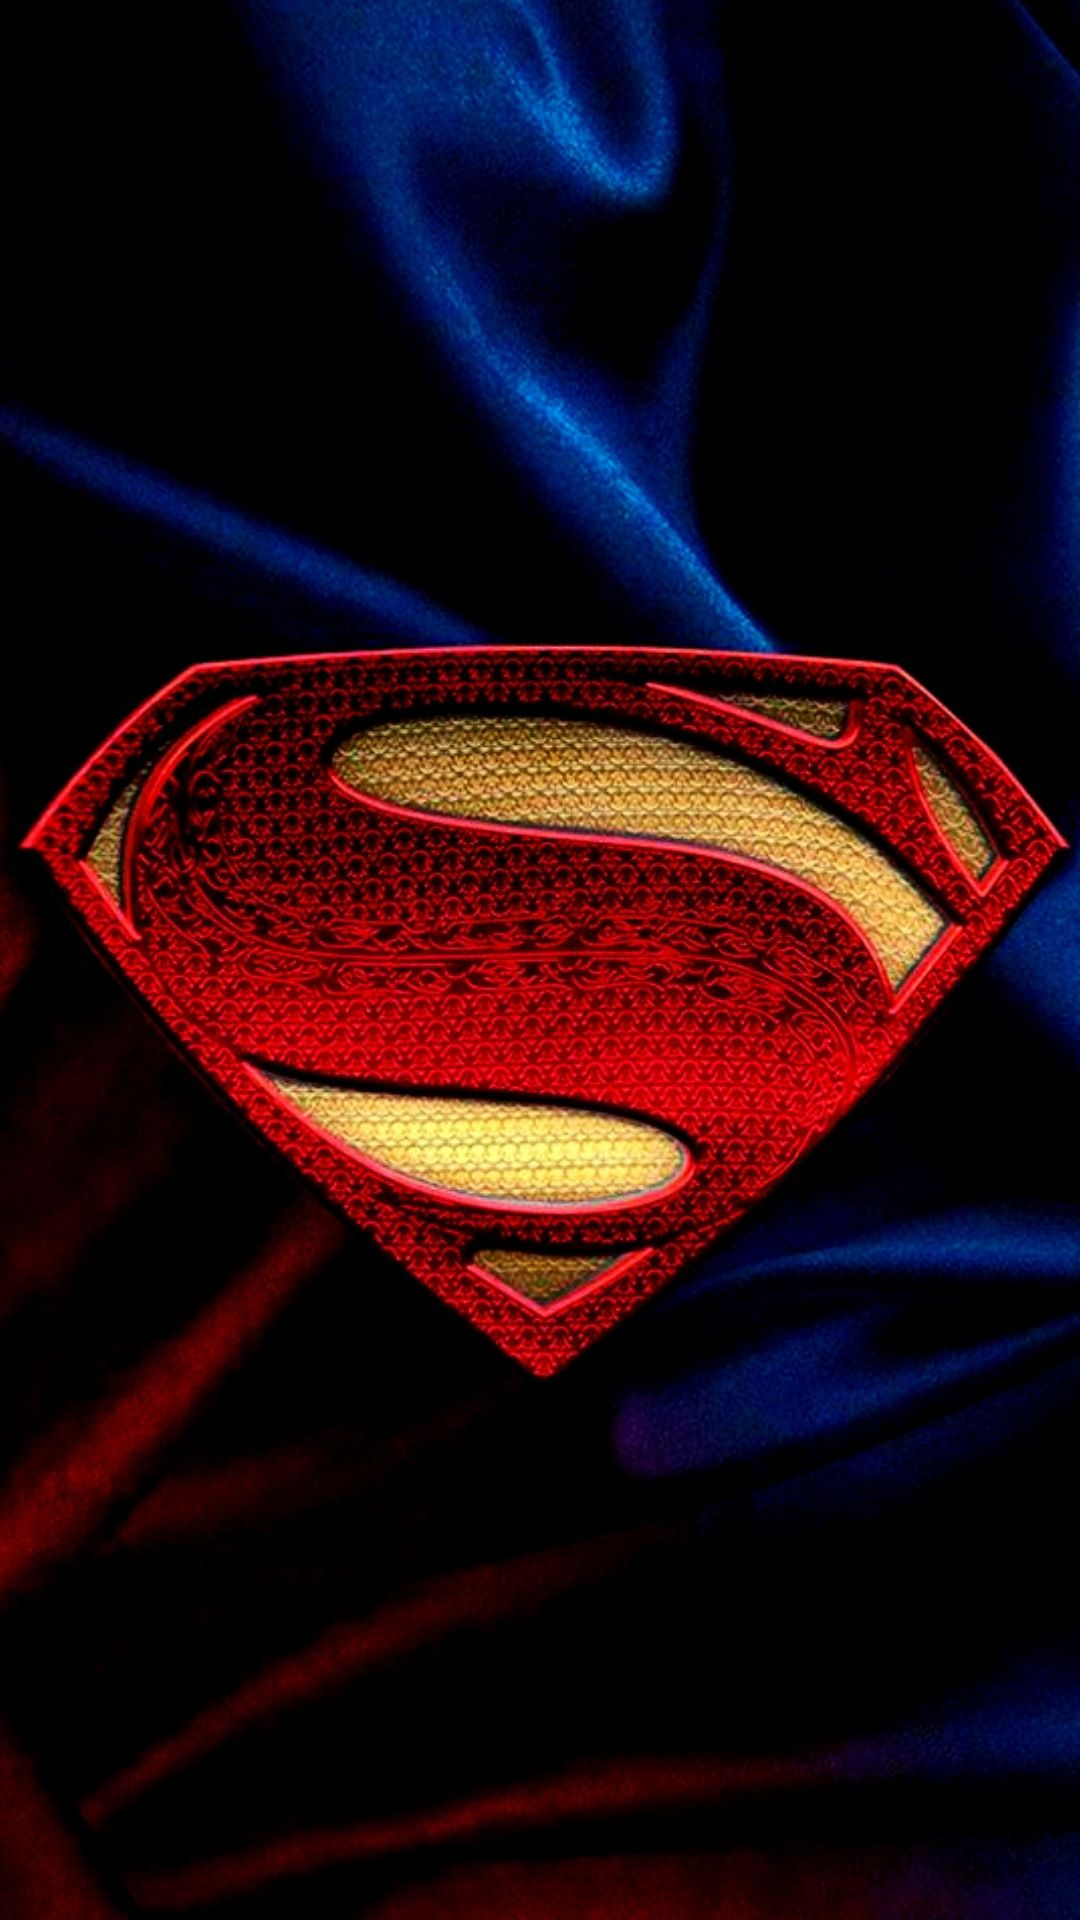 1080x1920 Best Superman HD wallpapers Only for iPhone users | Superman hd wallpaper, Superman artwork, Superman wallpaper